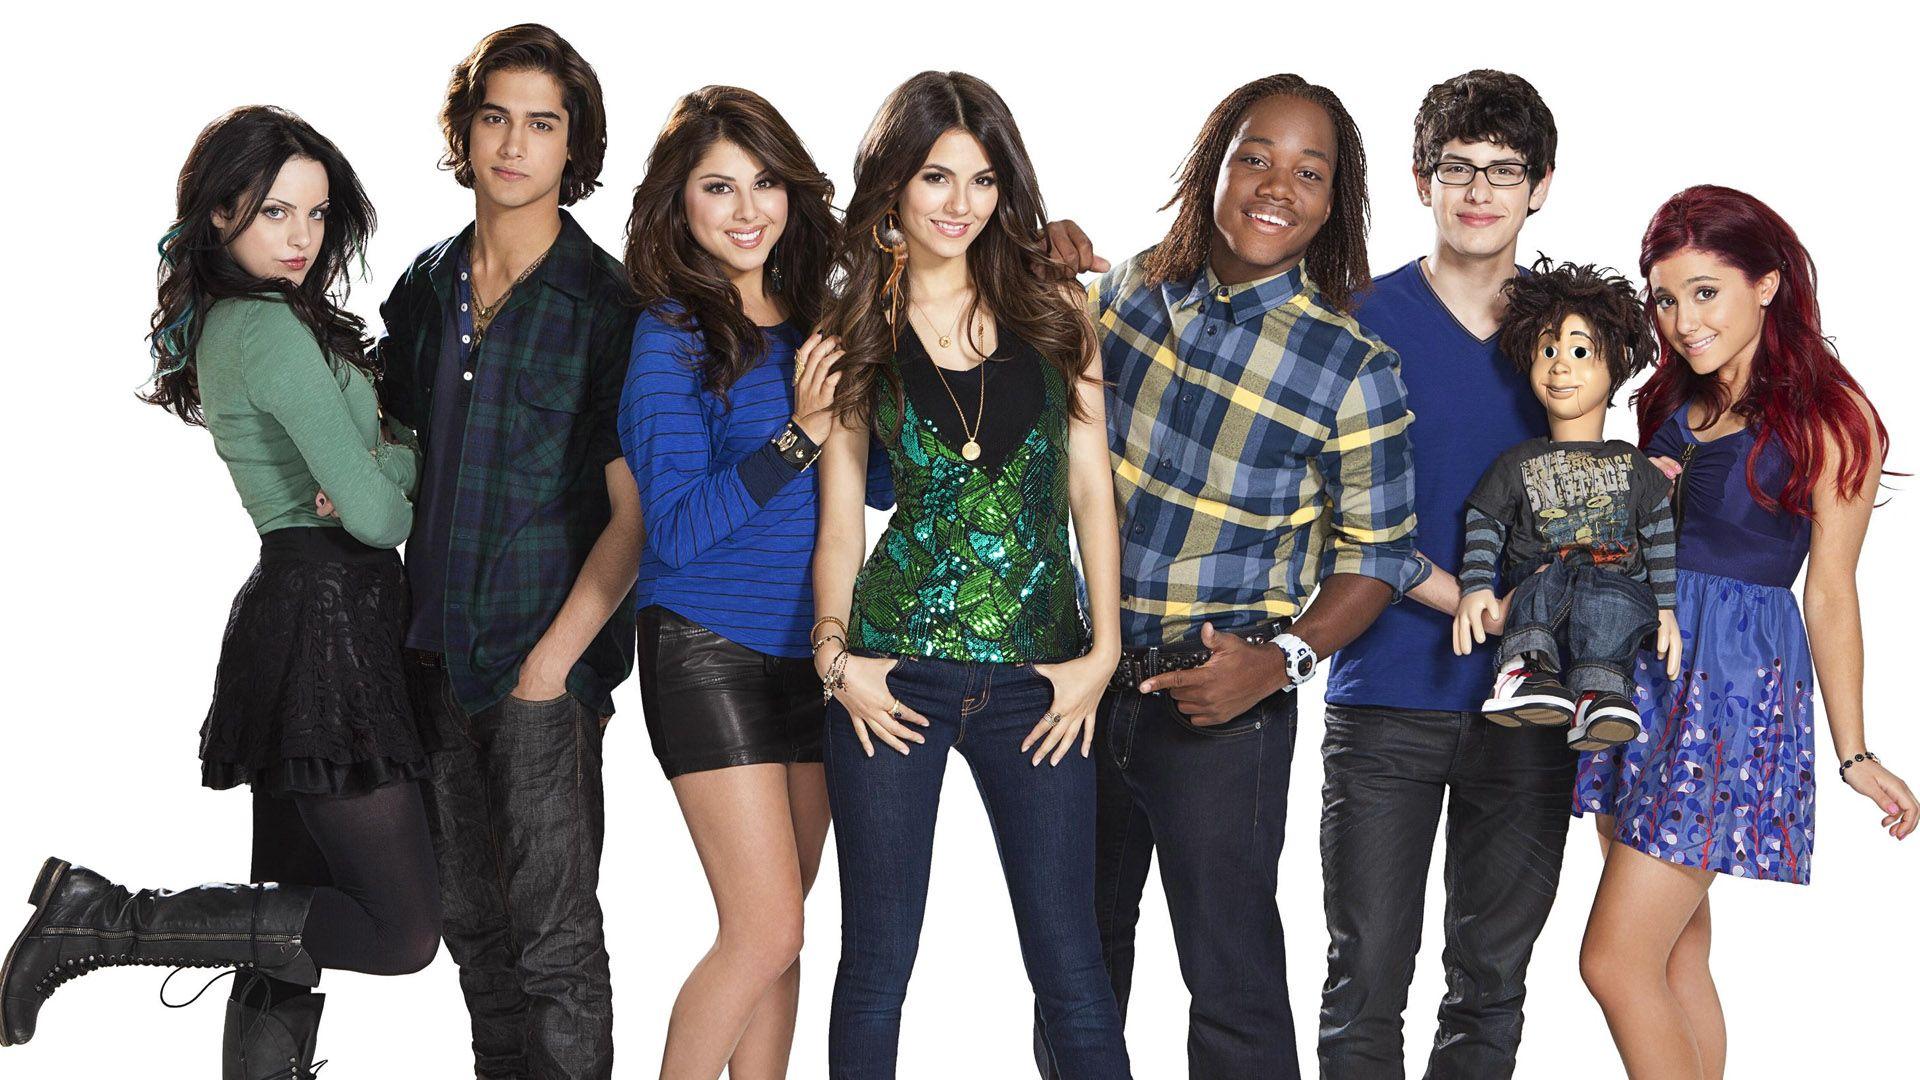 Austin And Ally Wallpapers